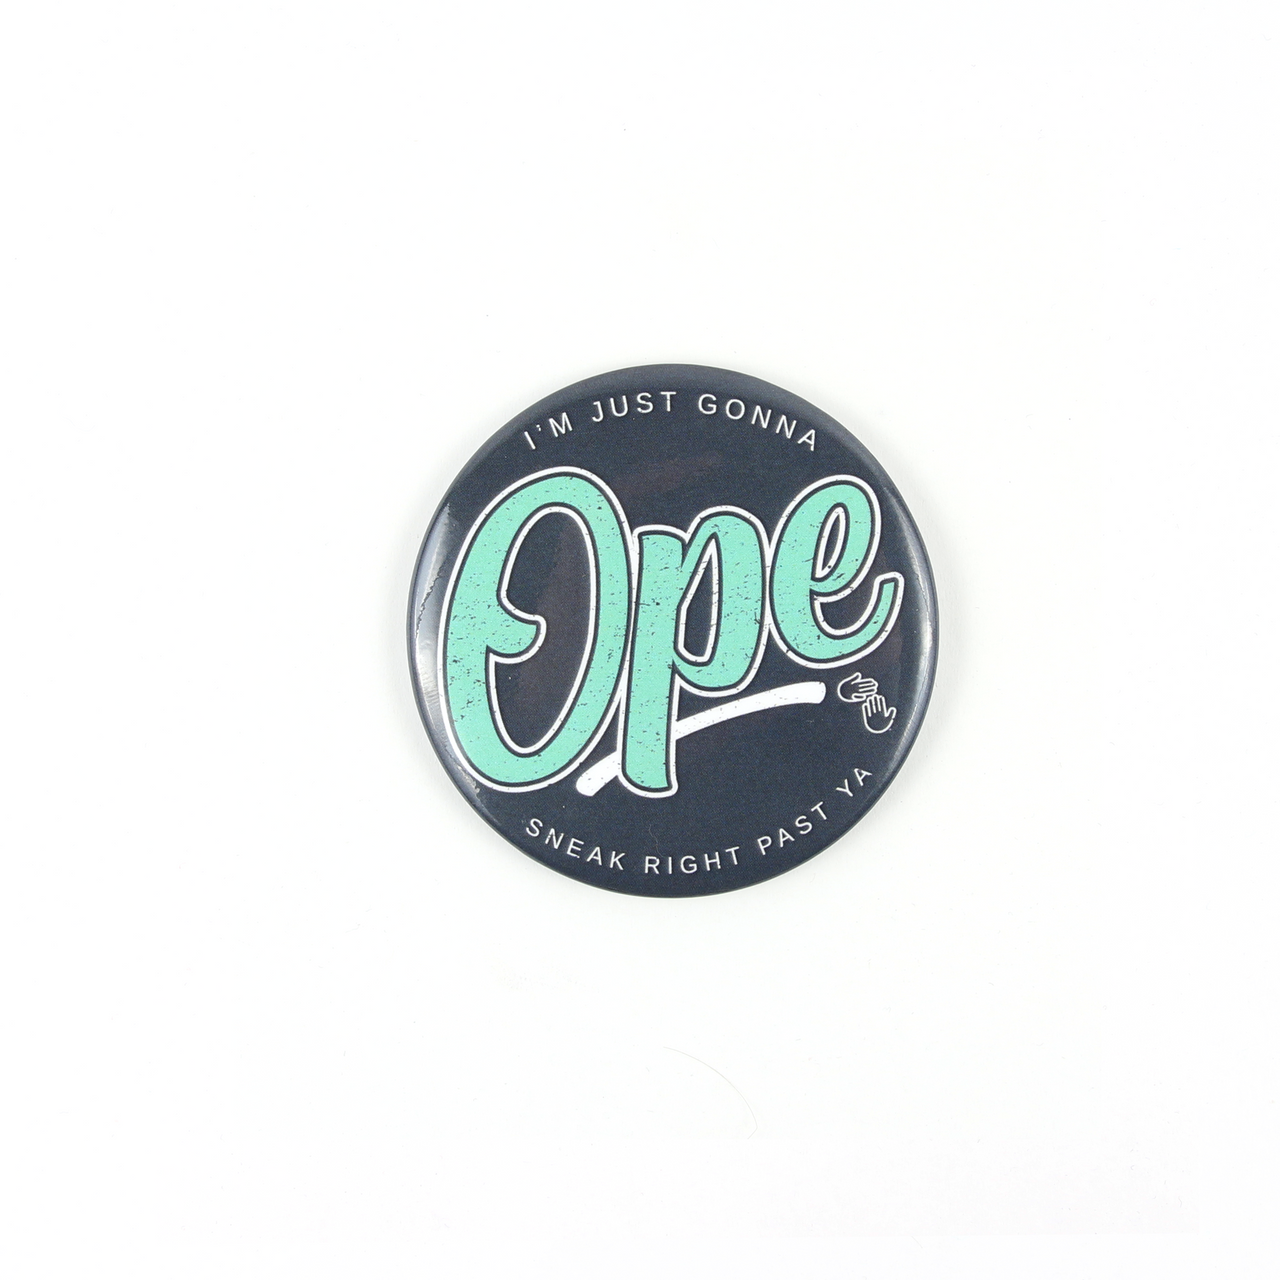 Ope! Magnet